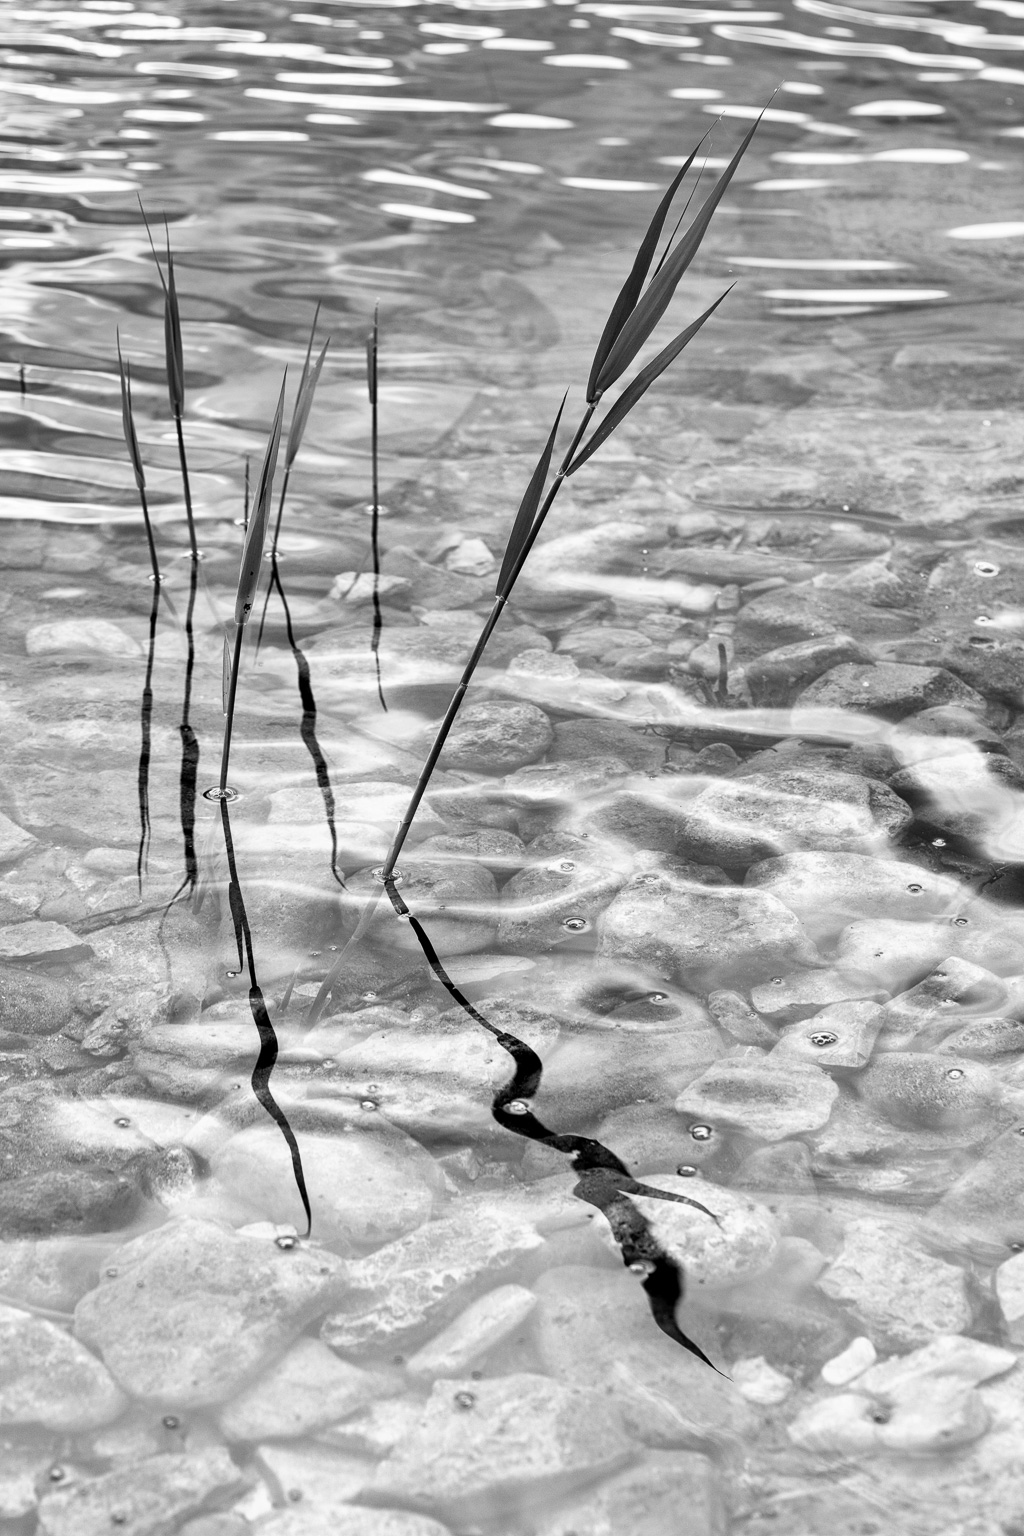 A black and white photograph of reeds extending from the water while their warped reflections appear on the surface of the water.